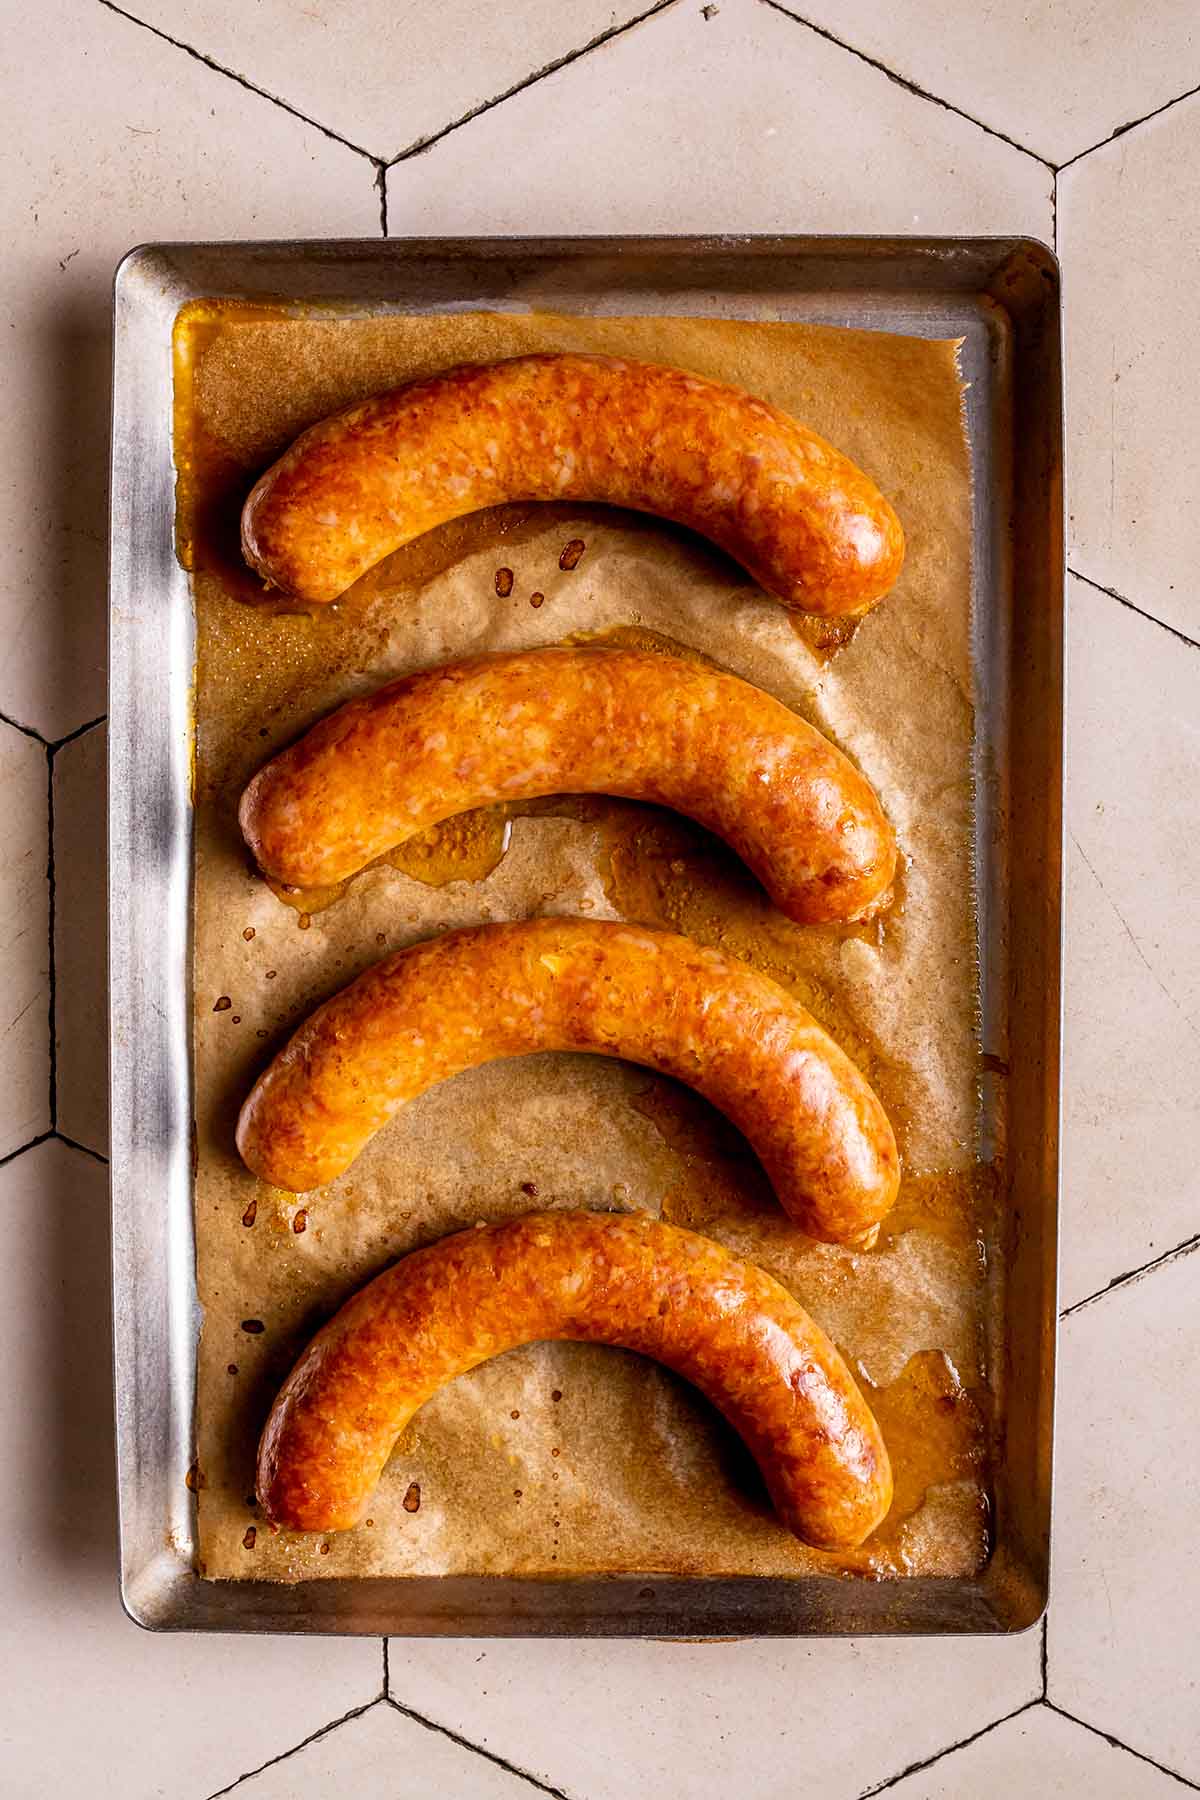 brats in the oven.